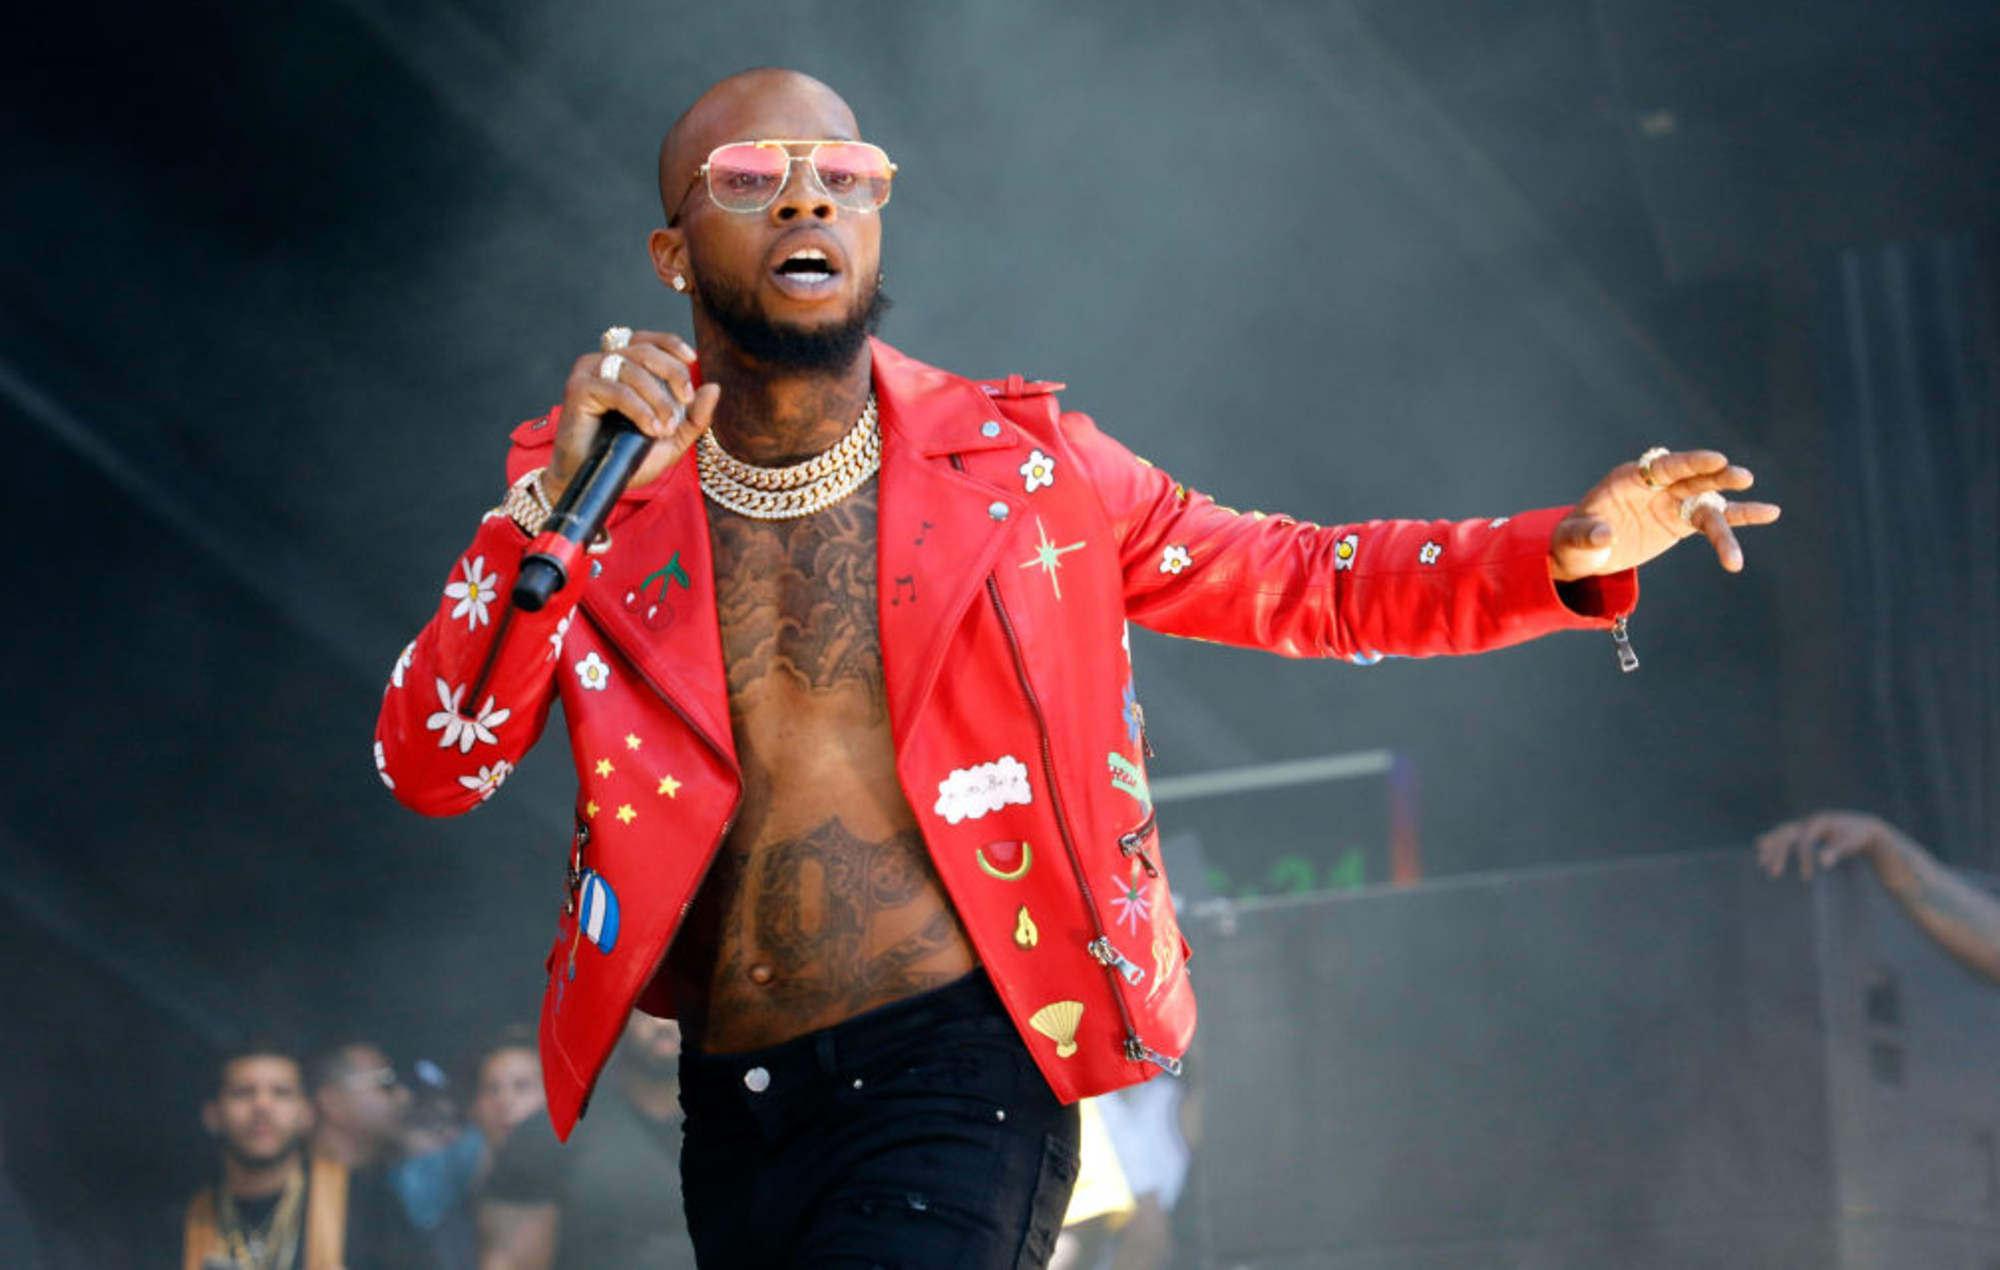 How Tall is Tory Lanez?